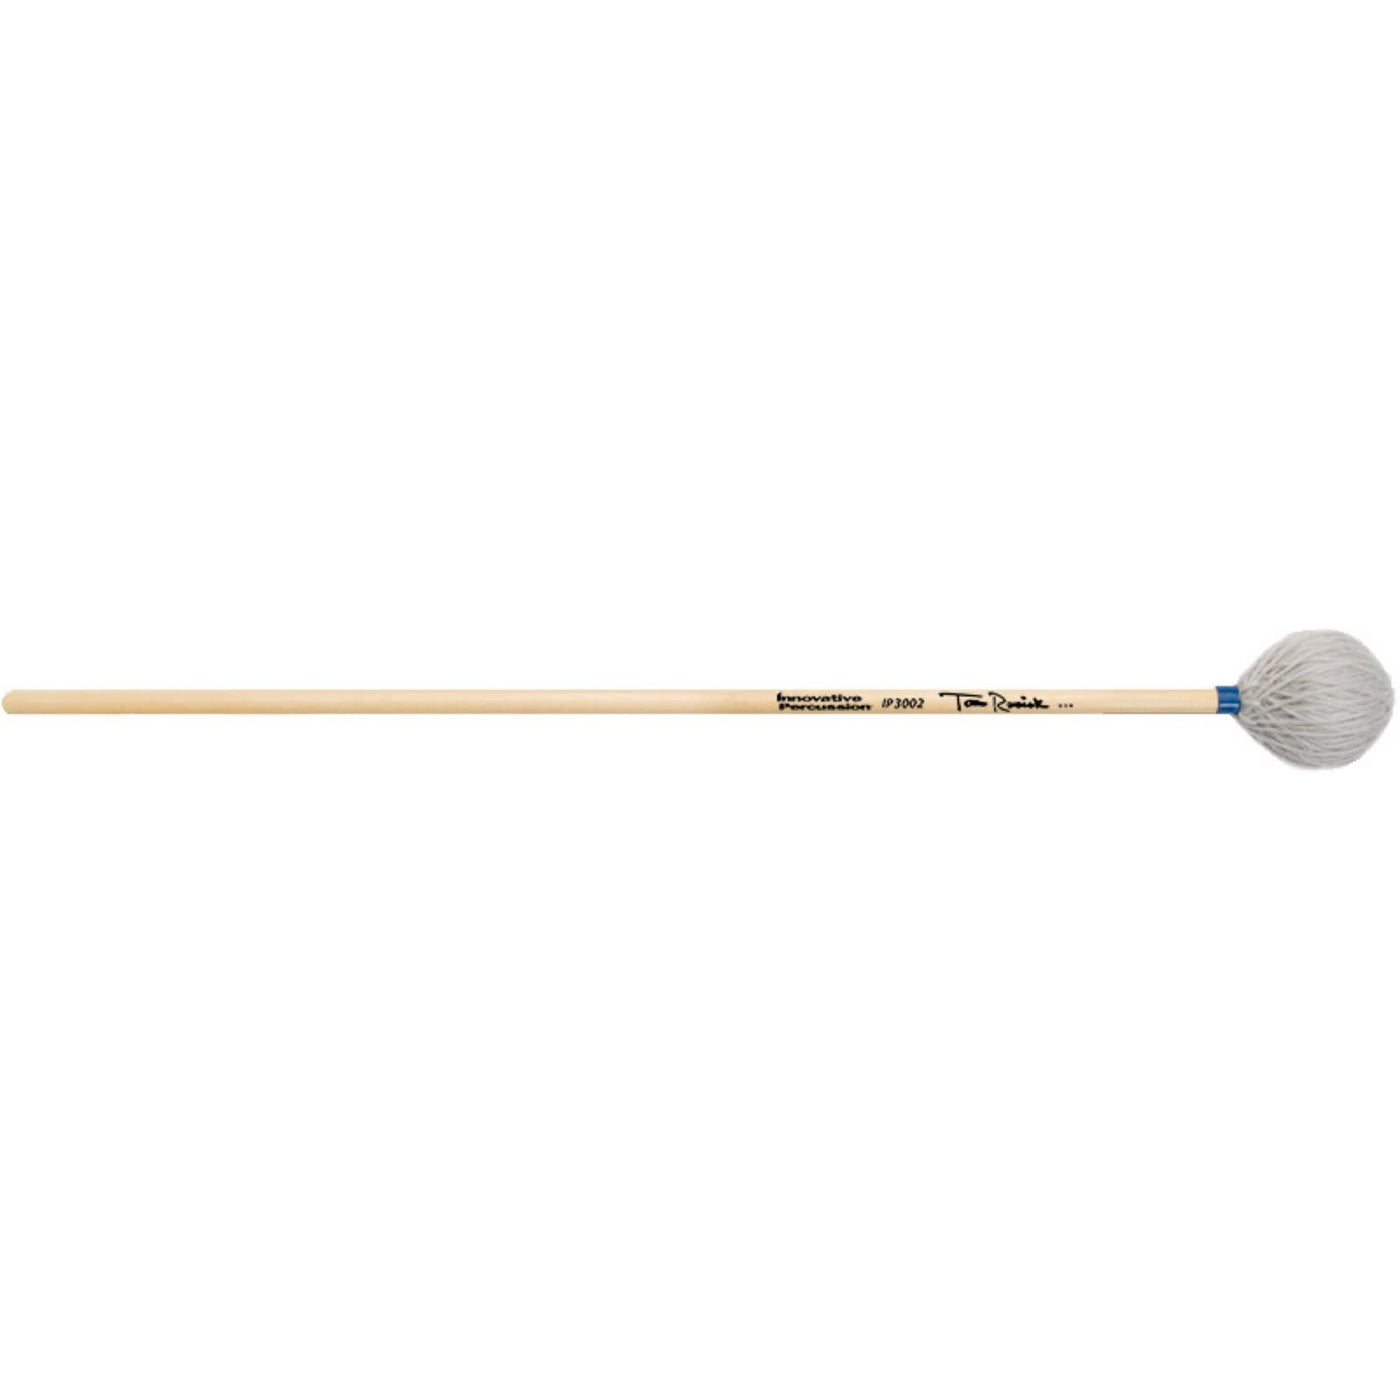 Innovative Percussion IP3002 Keyboard Mallet